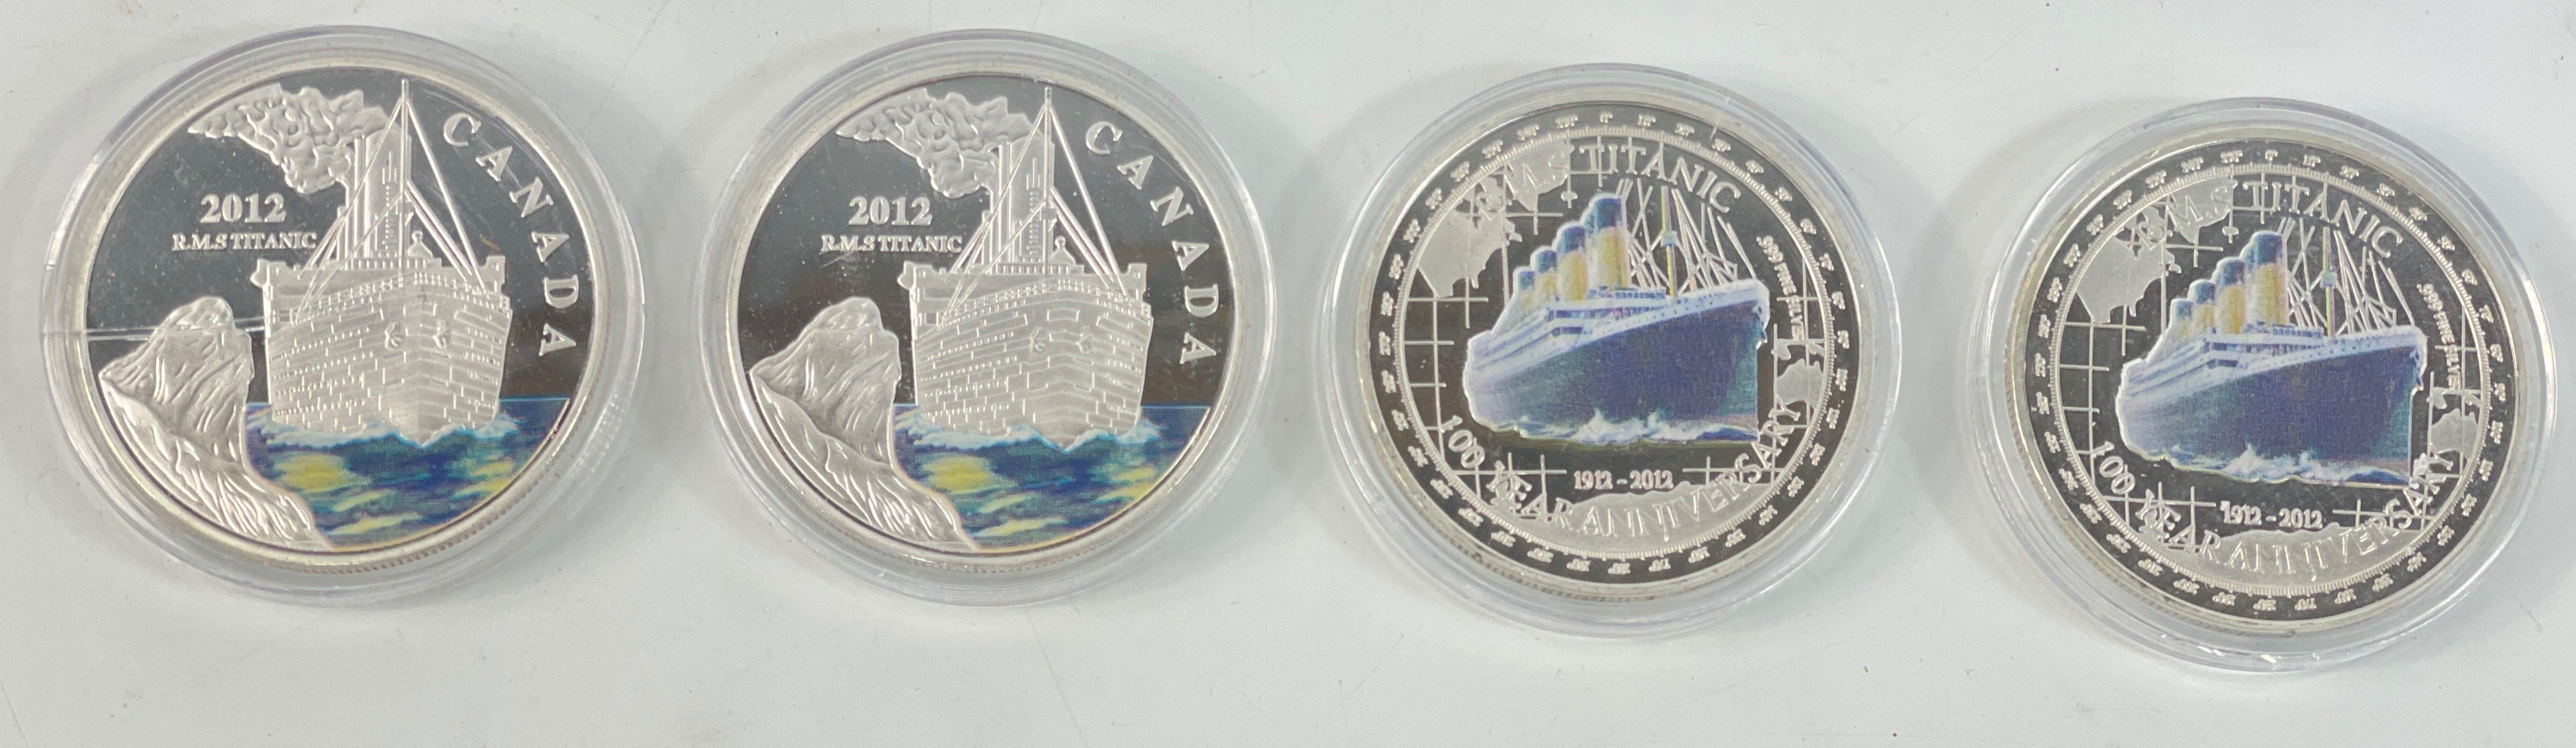 An encapsulated Canadian 1912 100th Commemorative RMS Titanic coin and also a SILVER Commemorative